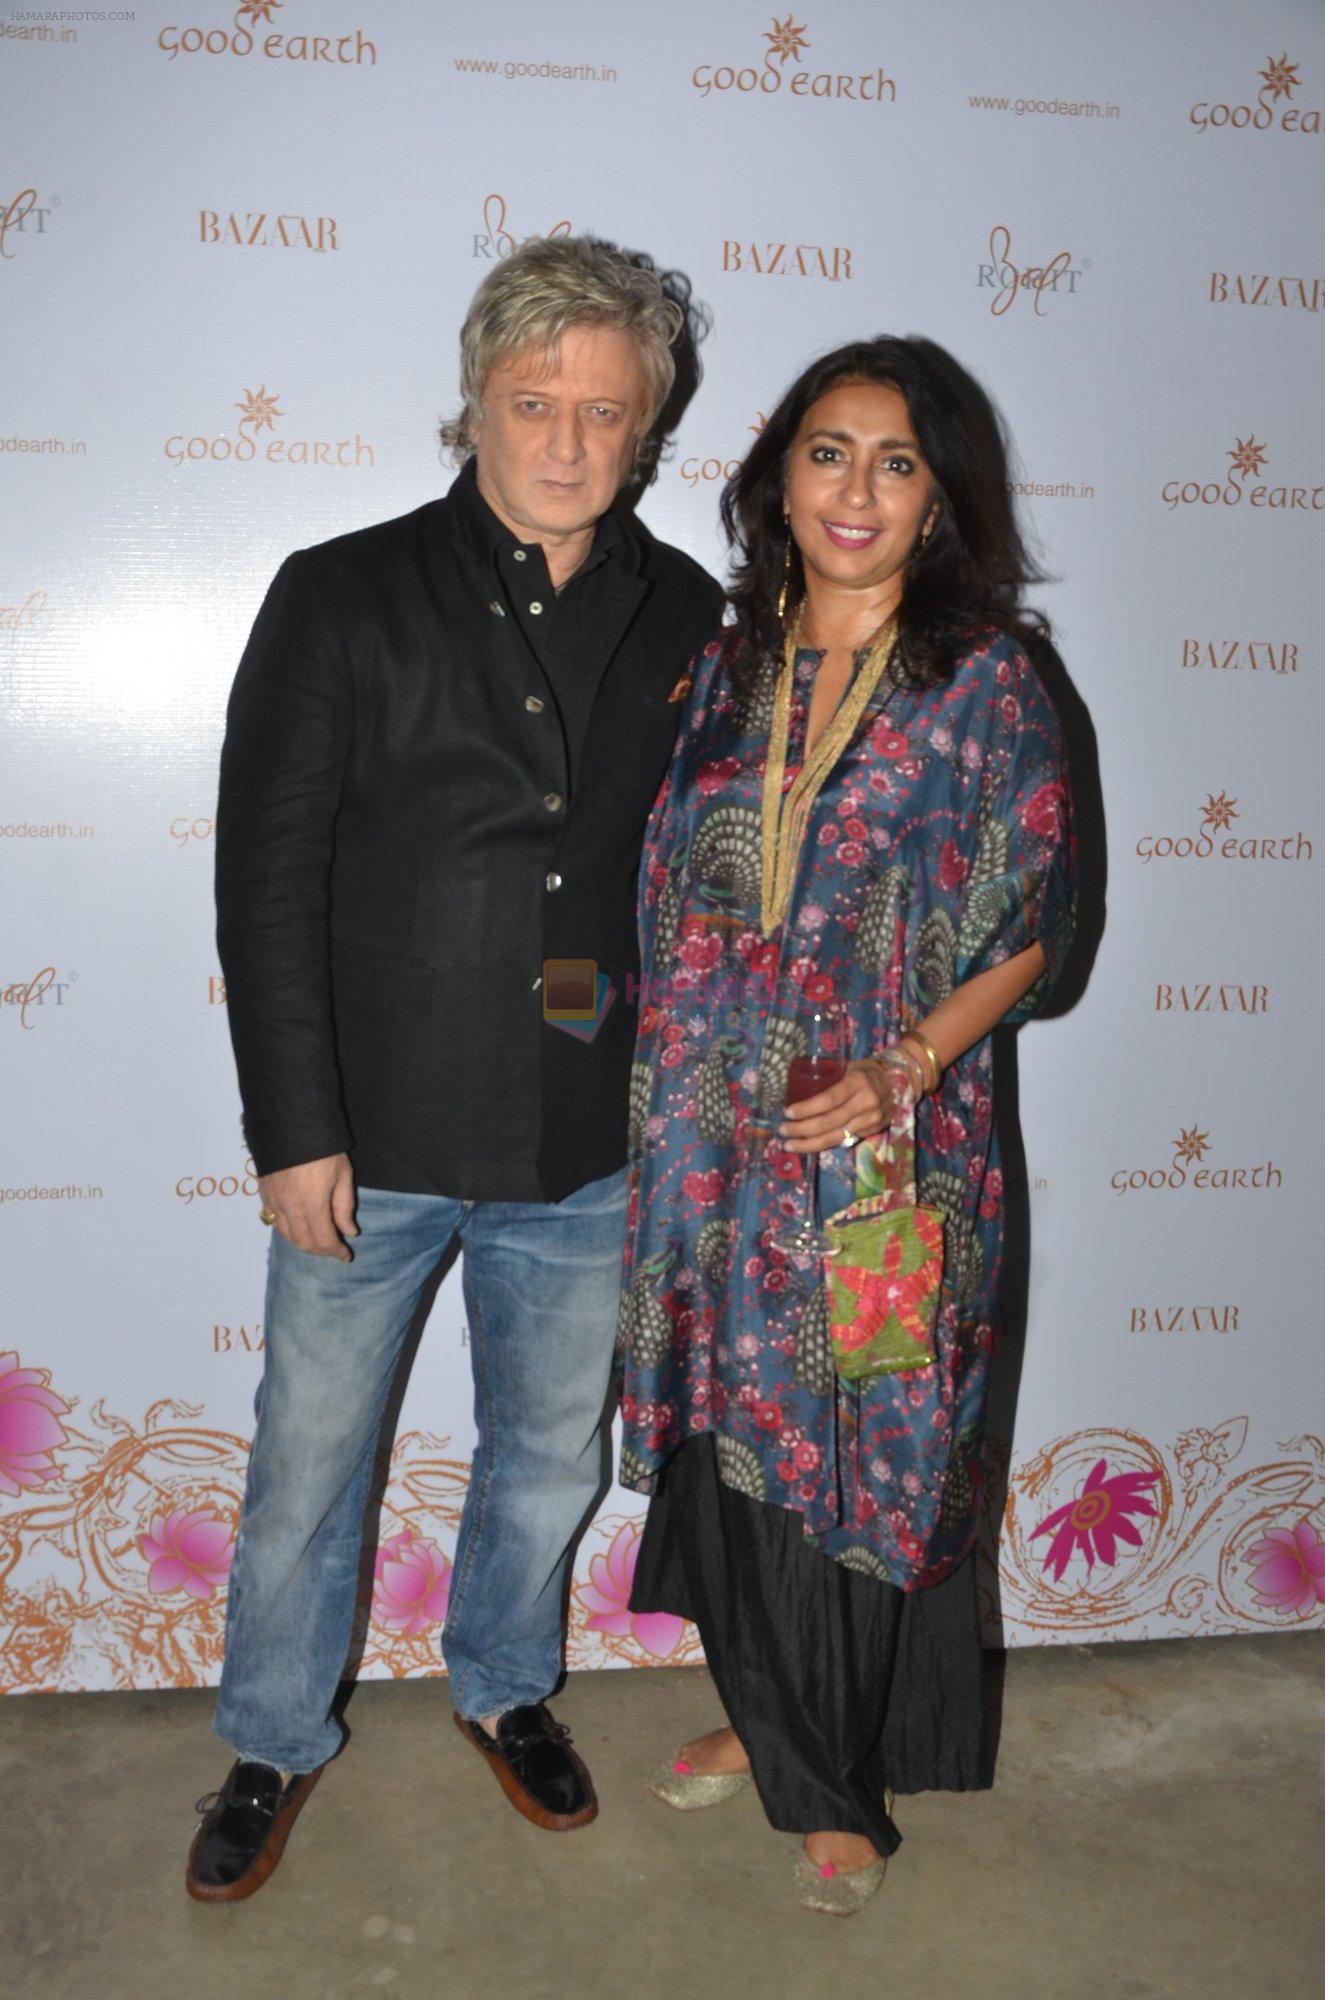 Rohit Bal's launch at Good Earth in Mumbai on 12th Nov 2016